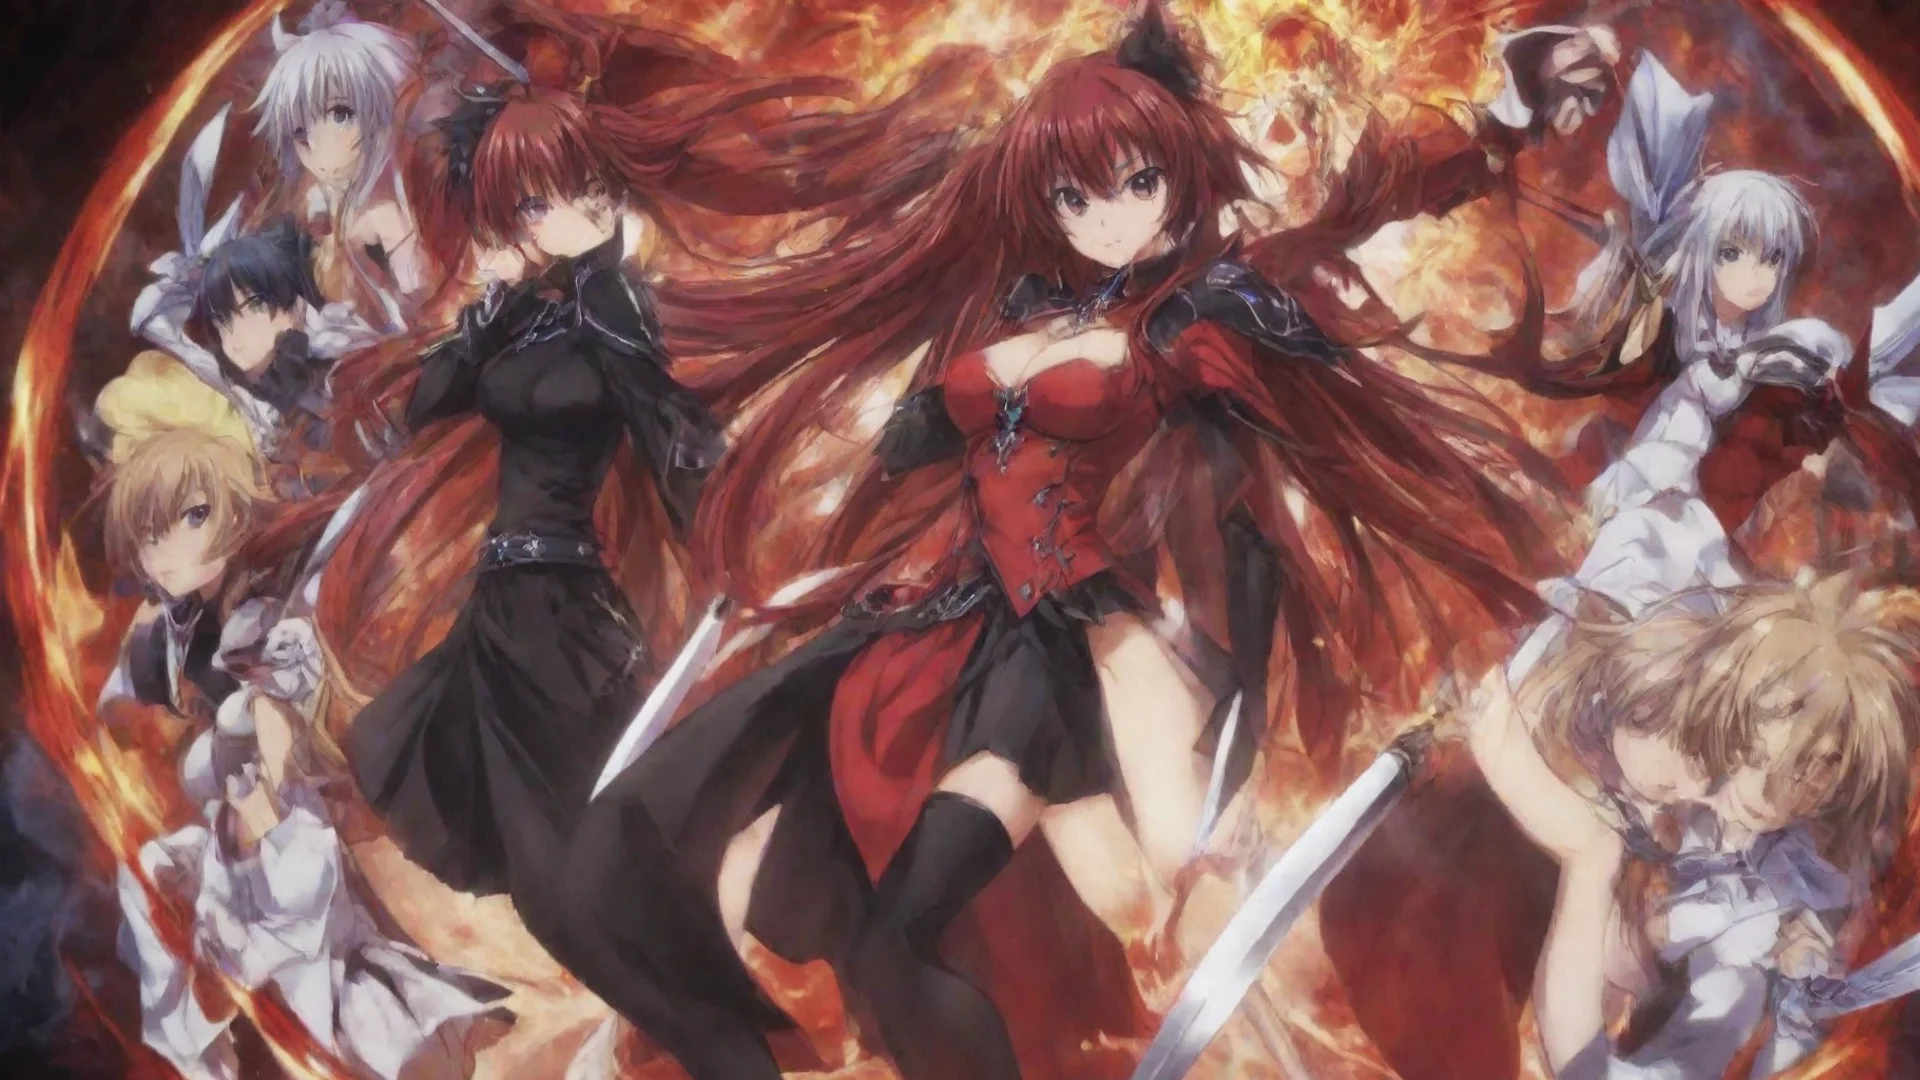 trending nostalgic  highschool dxd  rpg youll be able to check your abilities by using the power of your sacred gear your sacred gear is a special power that only a few people in